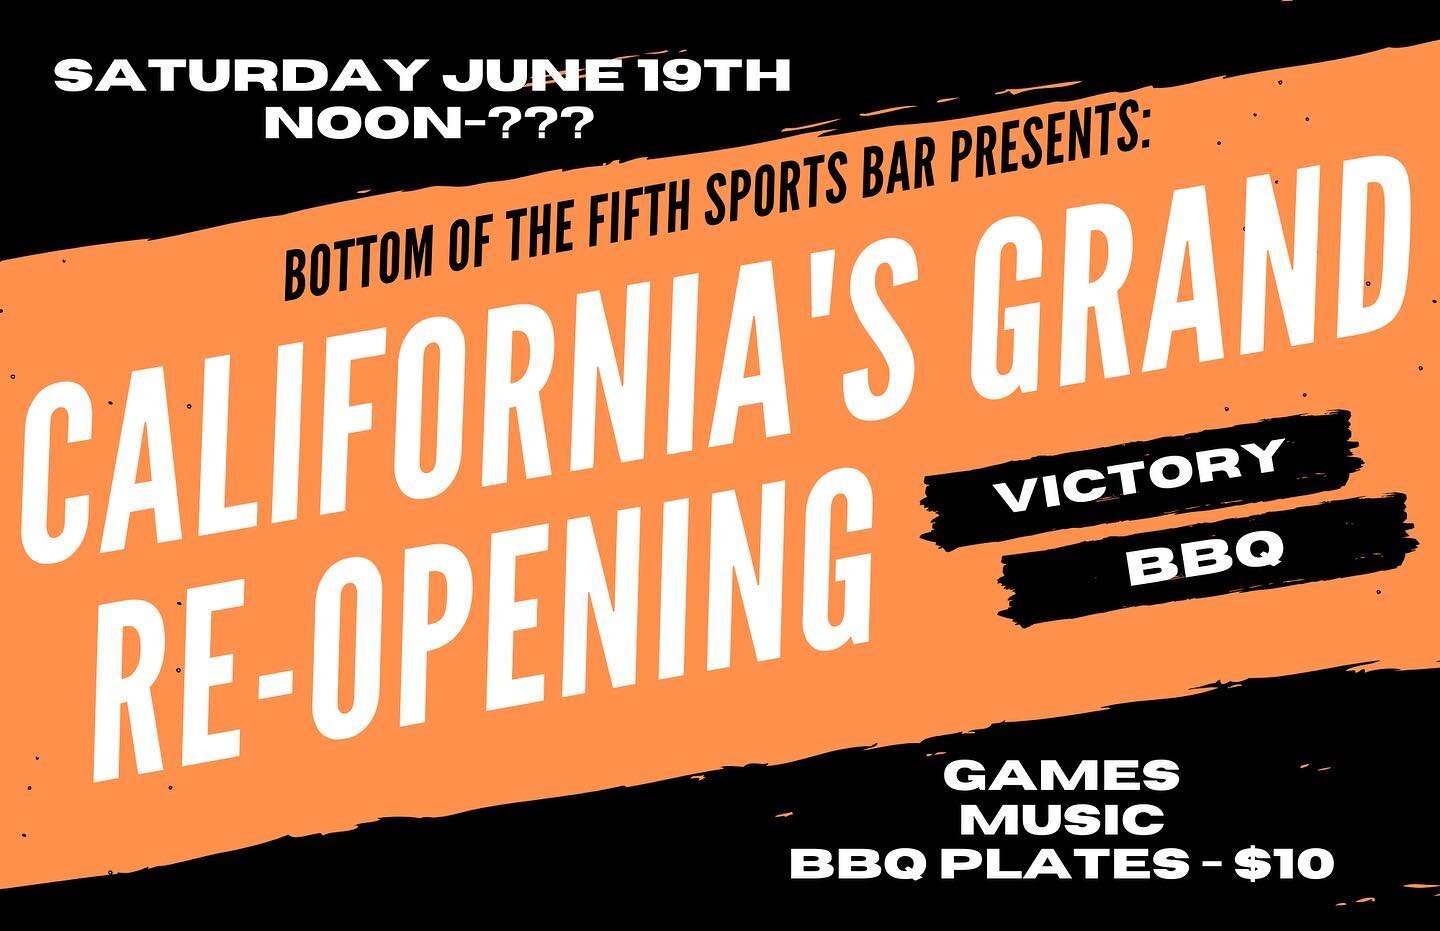 So - we are having a party! 
After California re-opens, please join us for a celebration BBQ June 19th! We will have games in the parking lot, music and a special BBQ plate! Come join the fun!